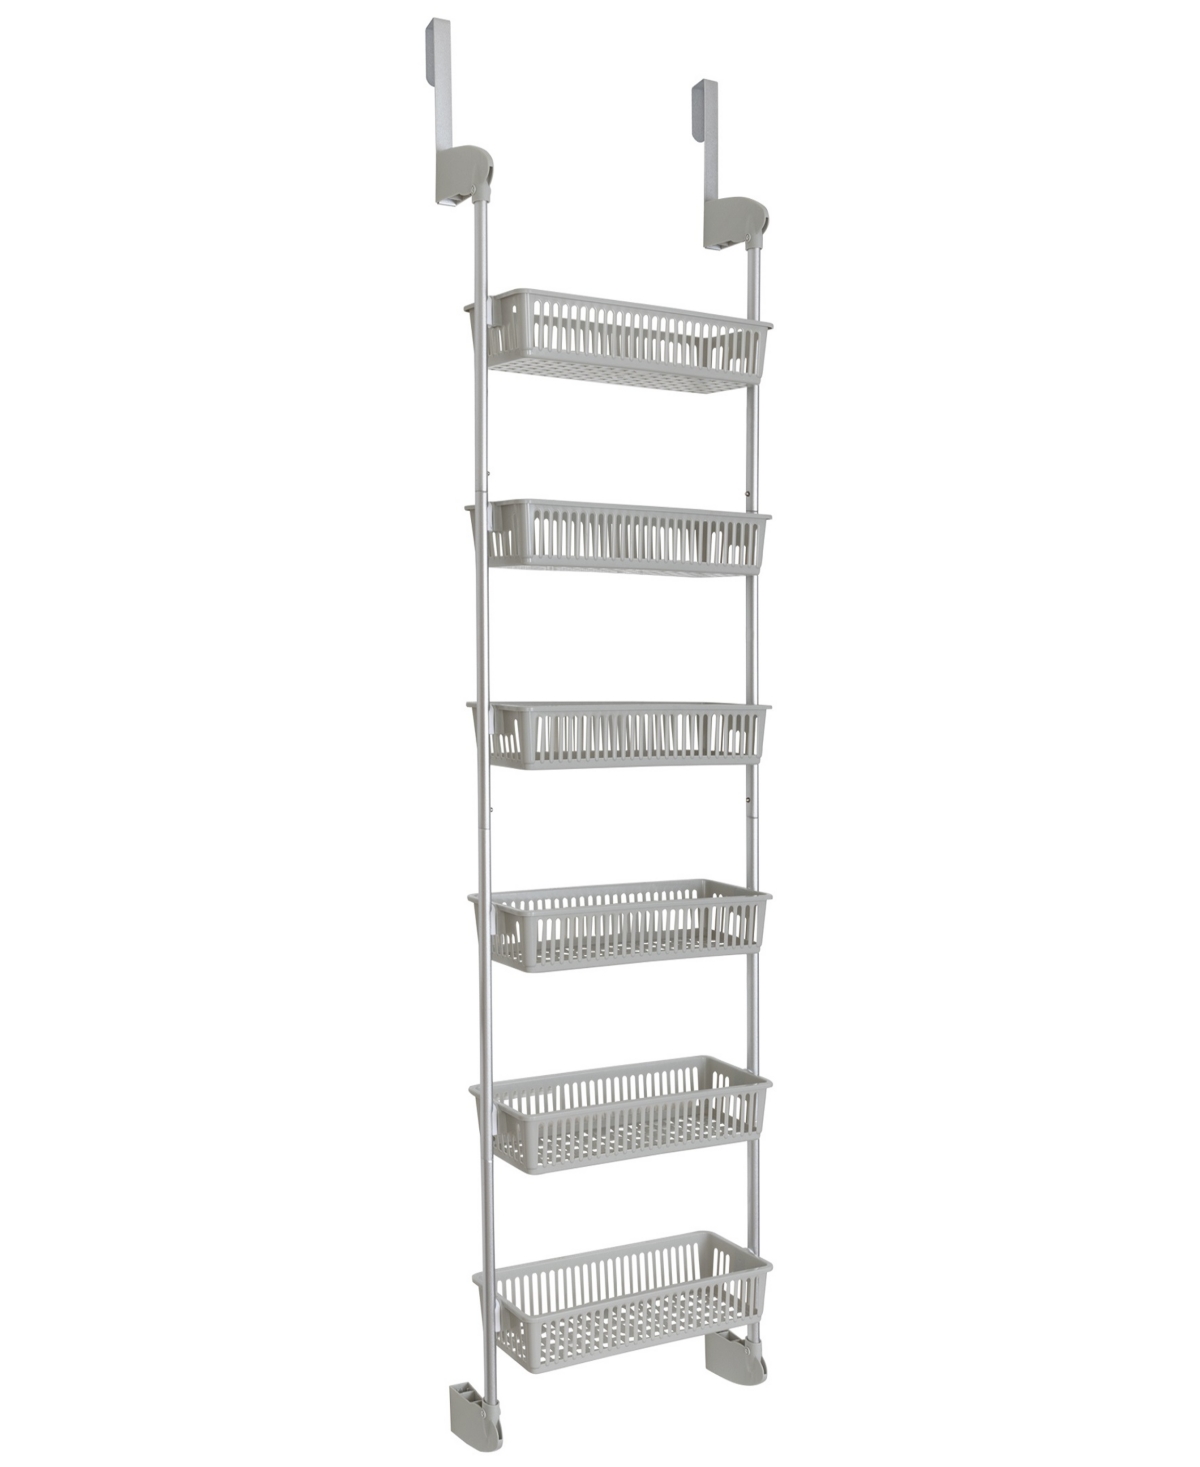 6-Tier Over-the-Door Hanging Pantry Organizer with Full Baskets - Cool Gray